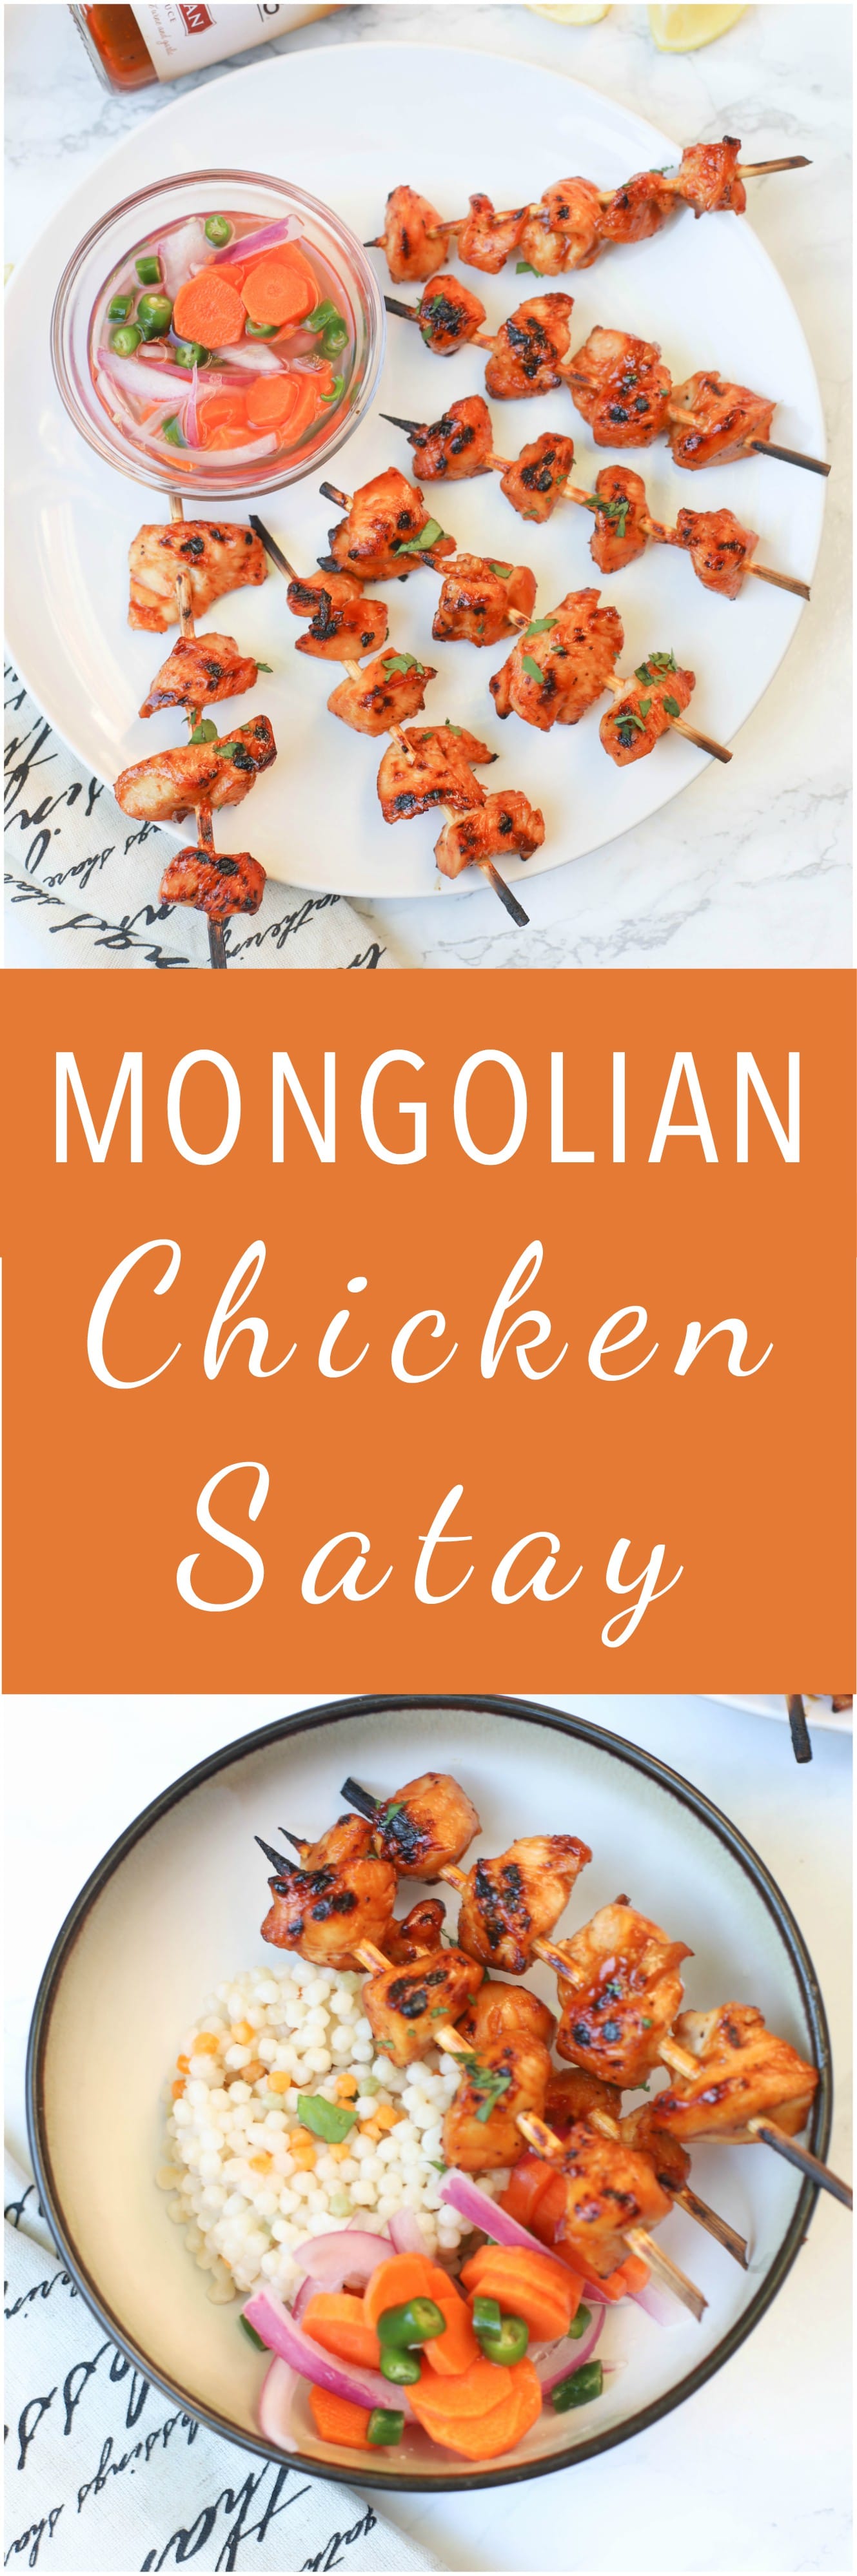 Mongolian Chicken Satay is a 2 ingredient easy, delicious appetizer or dinner that comes together in less than hour.